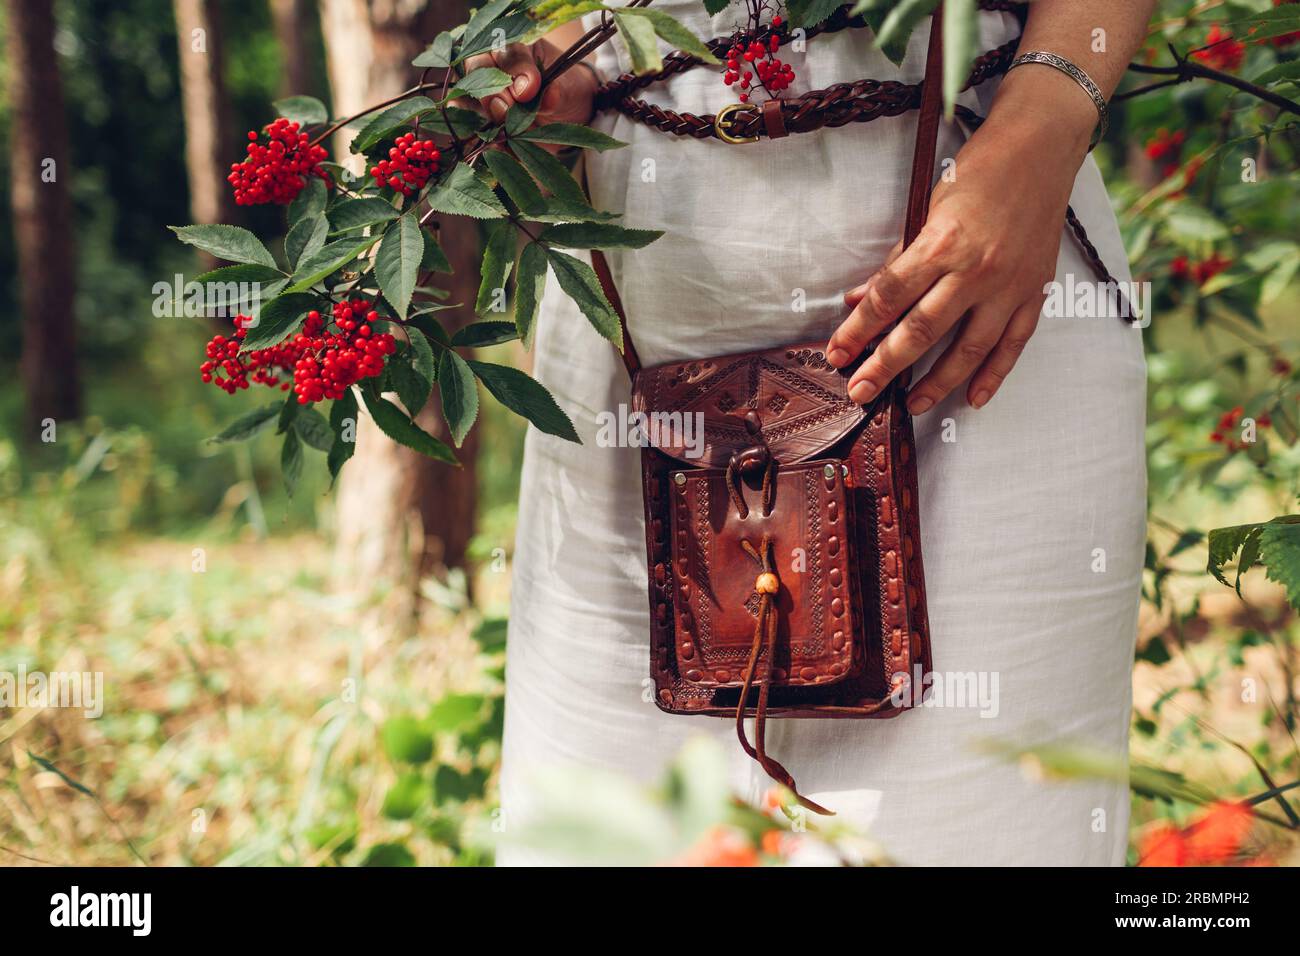 Close up of brown handmade leather purse. Stylish woman wearing white dress, belt, holding rustic handbag by red berries outdoors. Casual boho female Stock Photo